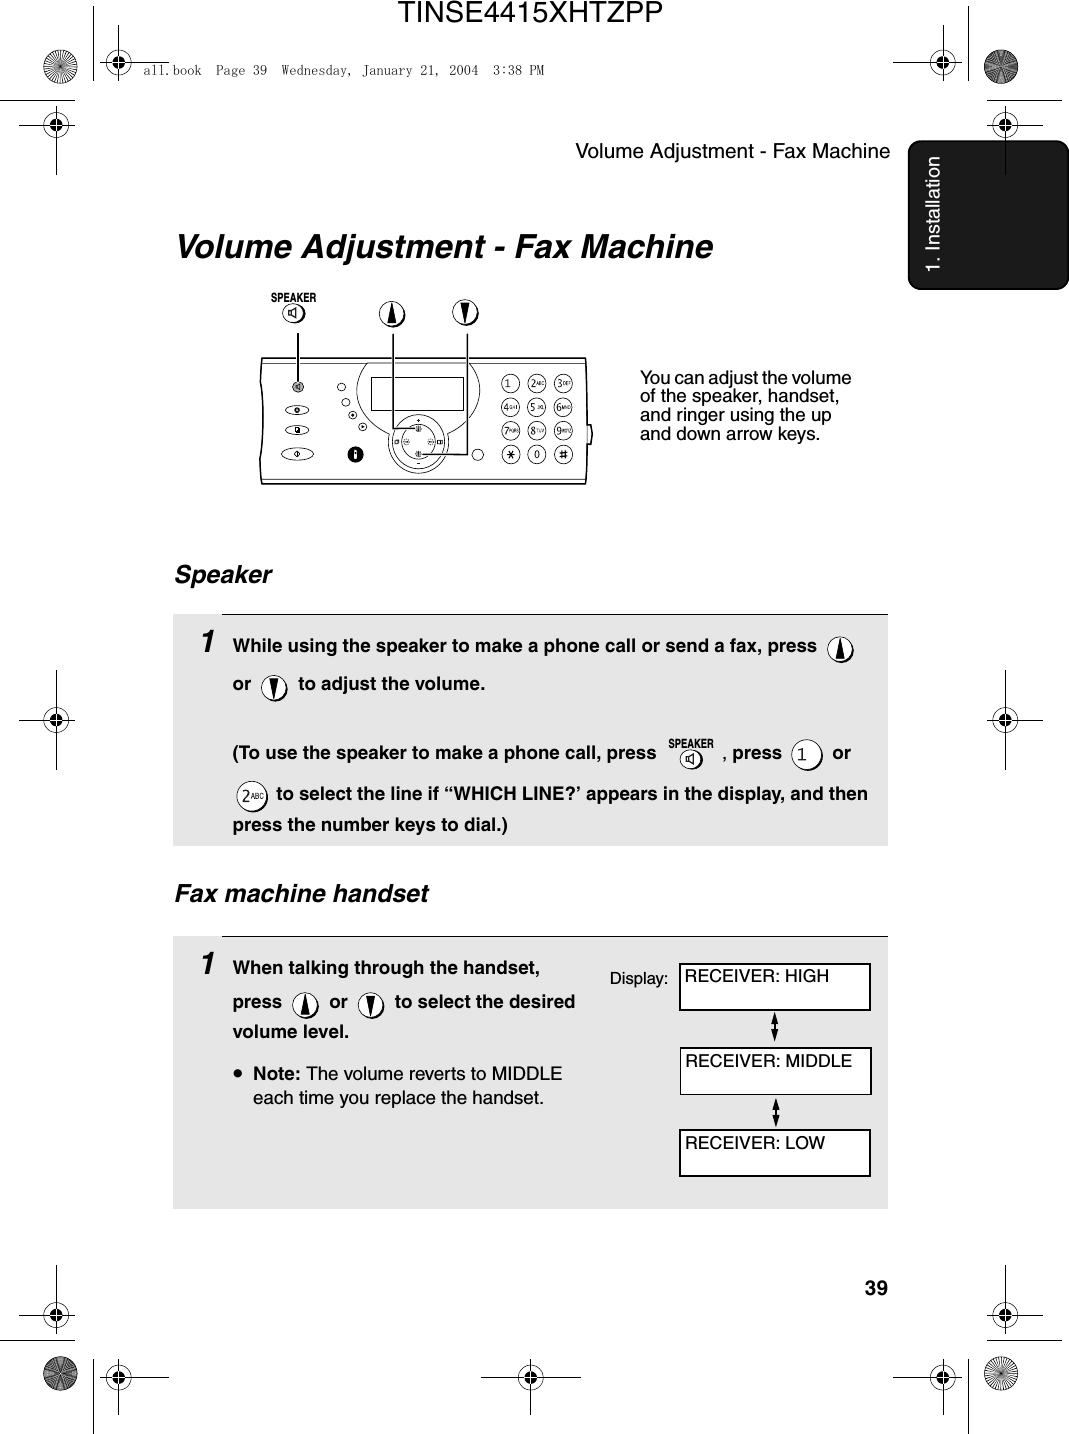 Volume Adjustment - Fax Machine391. InstallationVolume Adjustment - Fax Machine1While using the speaker to make a phone call or send a fax, press   or   to adjust the volume.(To use the speaker to make a phone call, press  , press  or  to select the line if “WHICH LINE?’ appears in the display, and then press the number keys to dial.)SPEAKERSpeakerSPEAKER1When talking through the handset, press   or   to select the desired volume level.•Note: The volume reverts to MIDDLE each time you replace the handset.Fax machine handsetYou can adjust the volume of the speaker, handset, and ringer using the up and down arrow keys.Display: RECEIVER: HIGHRECEIVER: MIDDLERECEIVER: LOWall.book  Page 39  Wednesday, January 21, 2004  3:38 PMTINSE4415XHTZPP